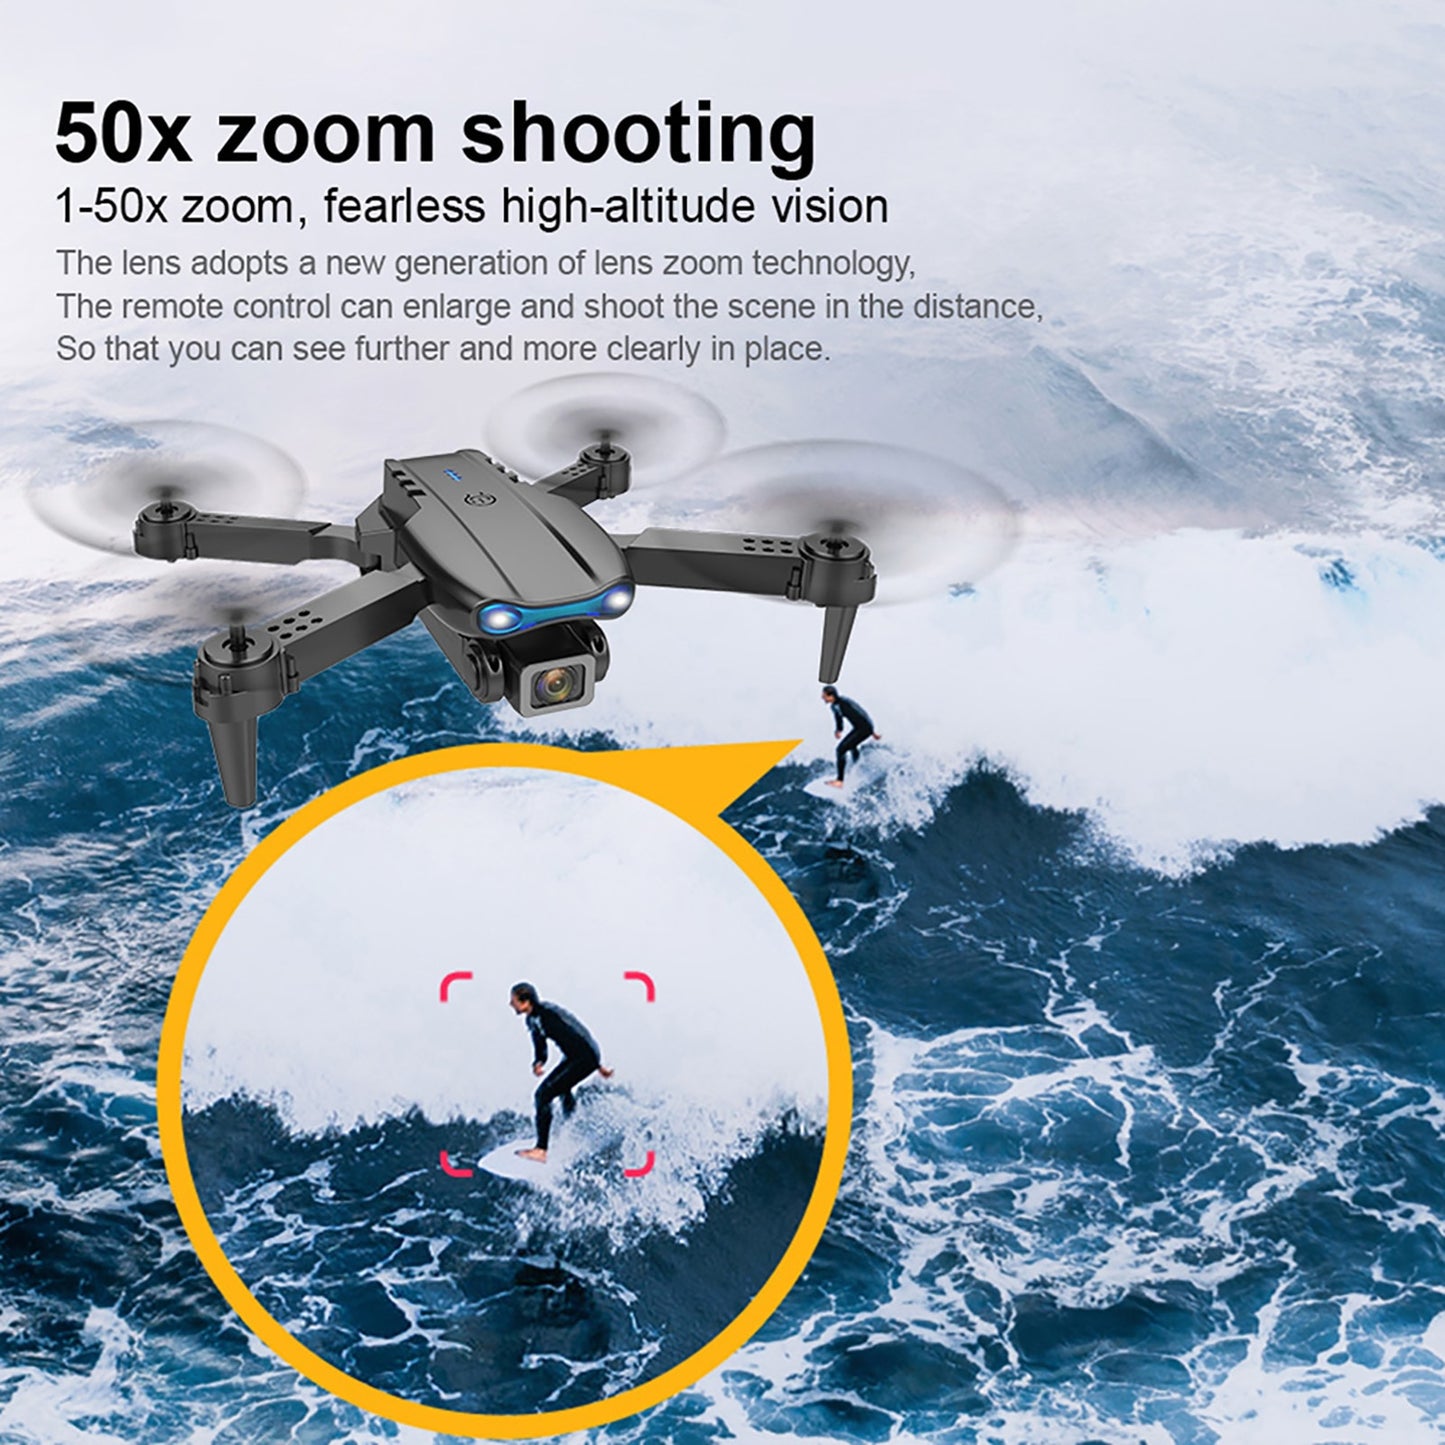 4K HD Dual Camera 1080P Obstacle Avoidance RC Drone